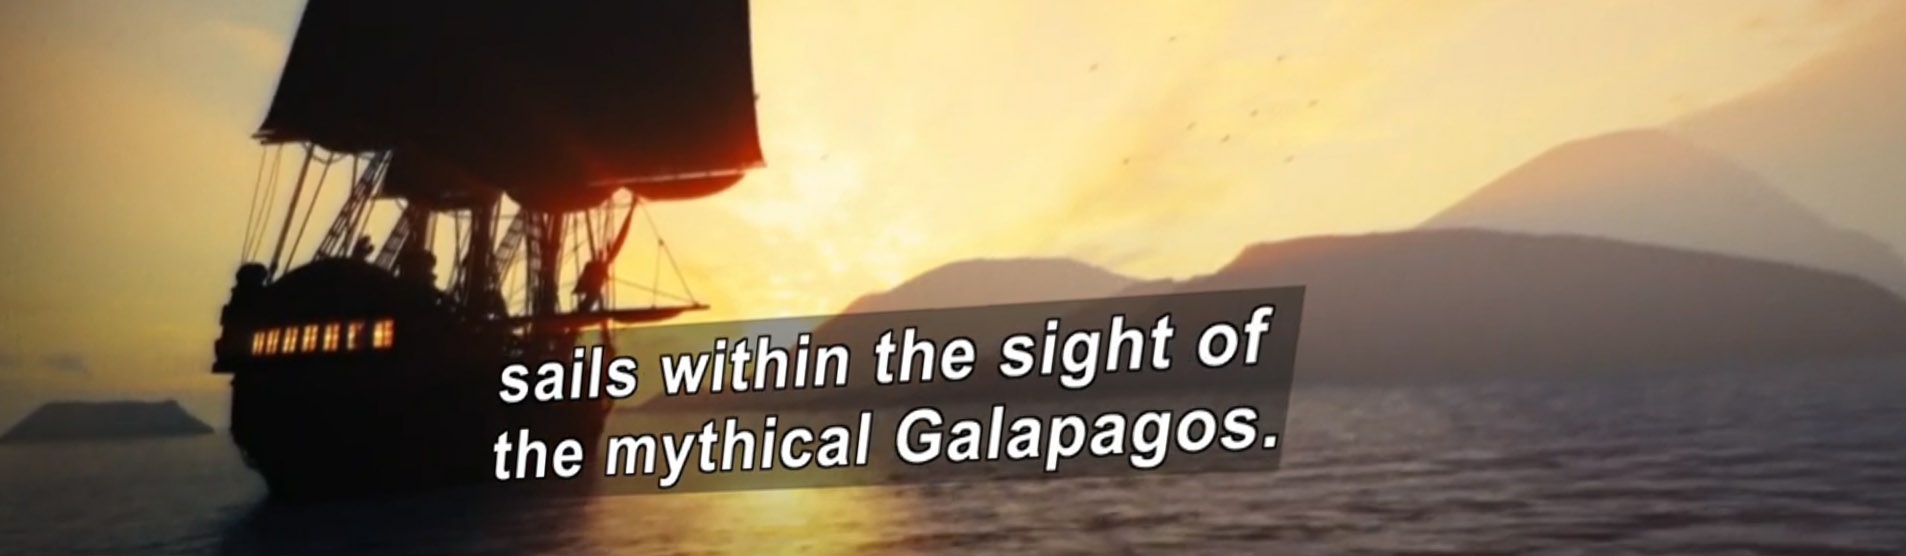 A ship with sails is silhouetted against a warm sunset. Screen shot from a video with captions.